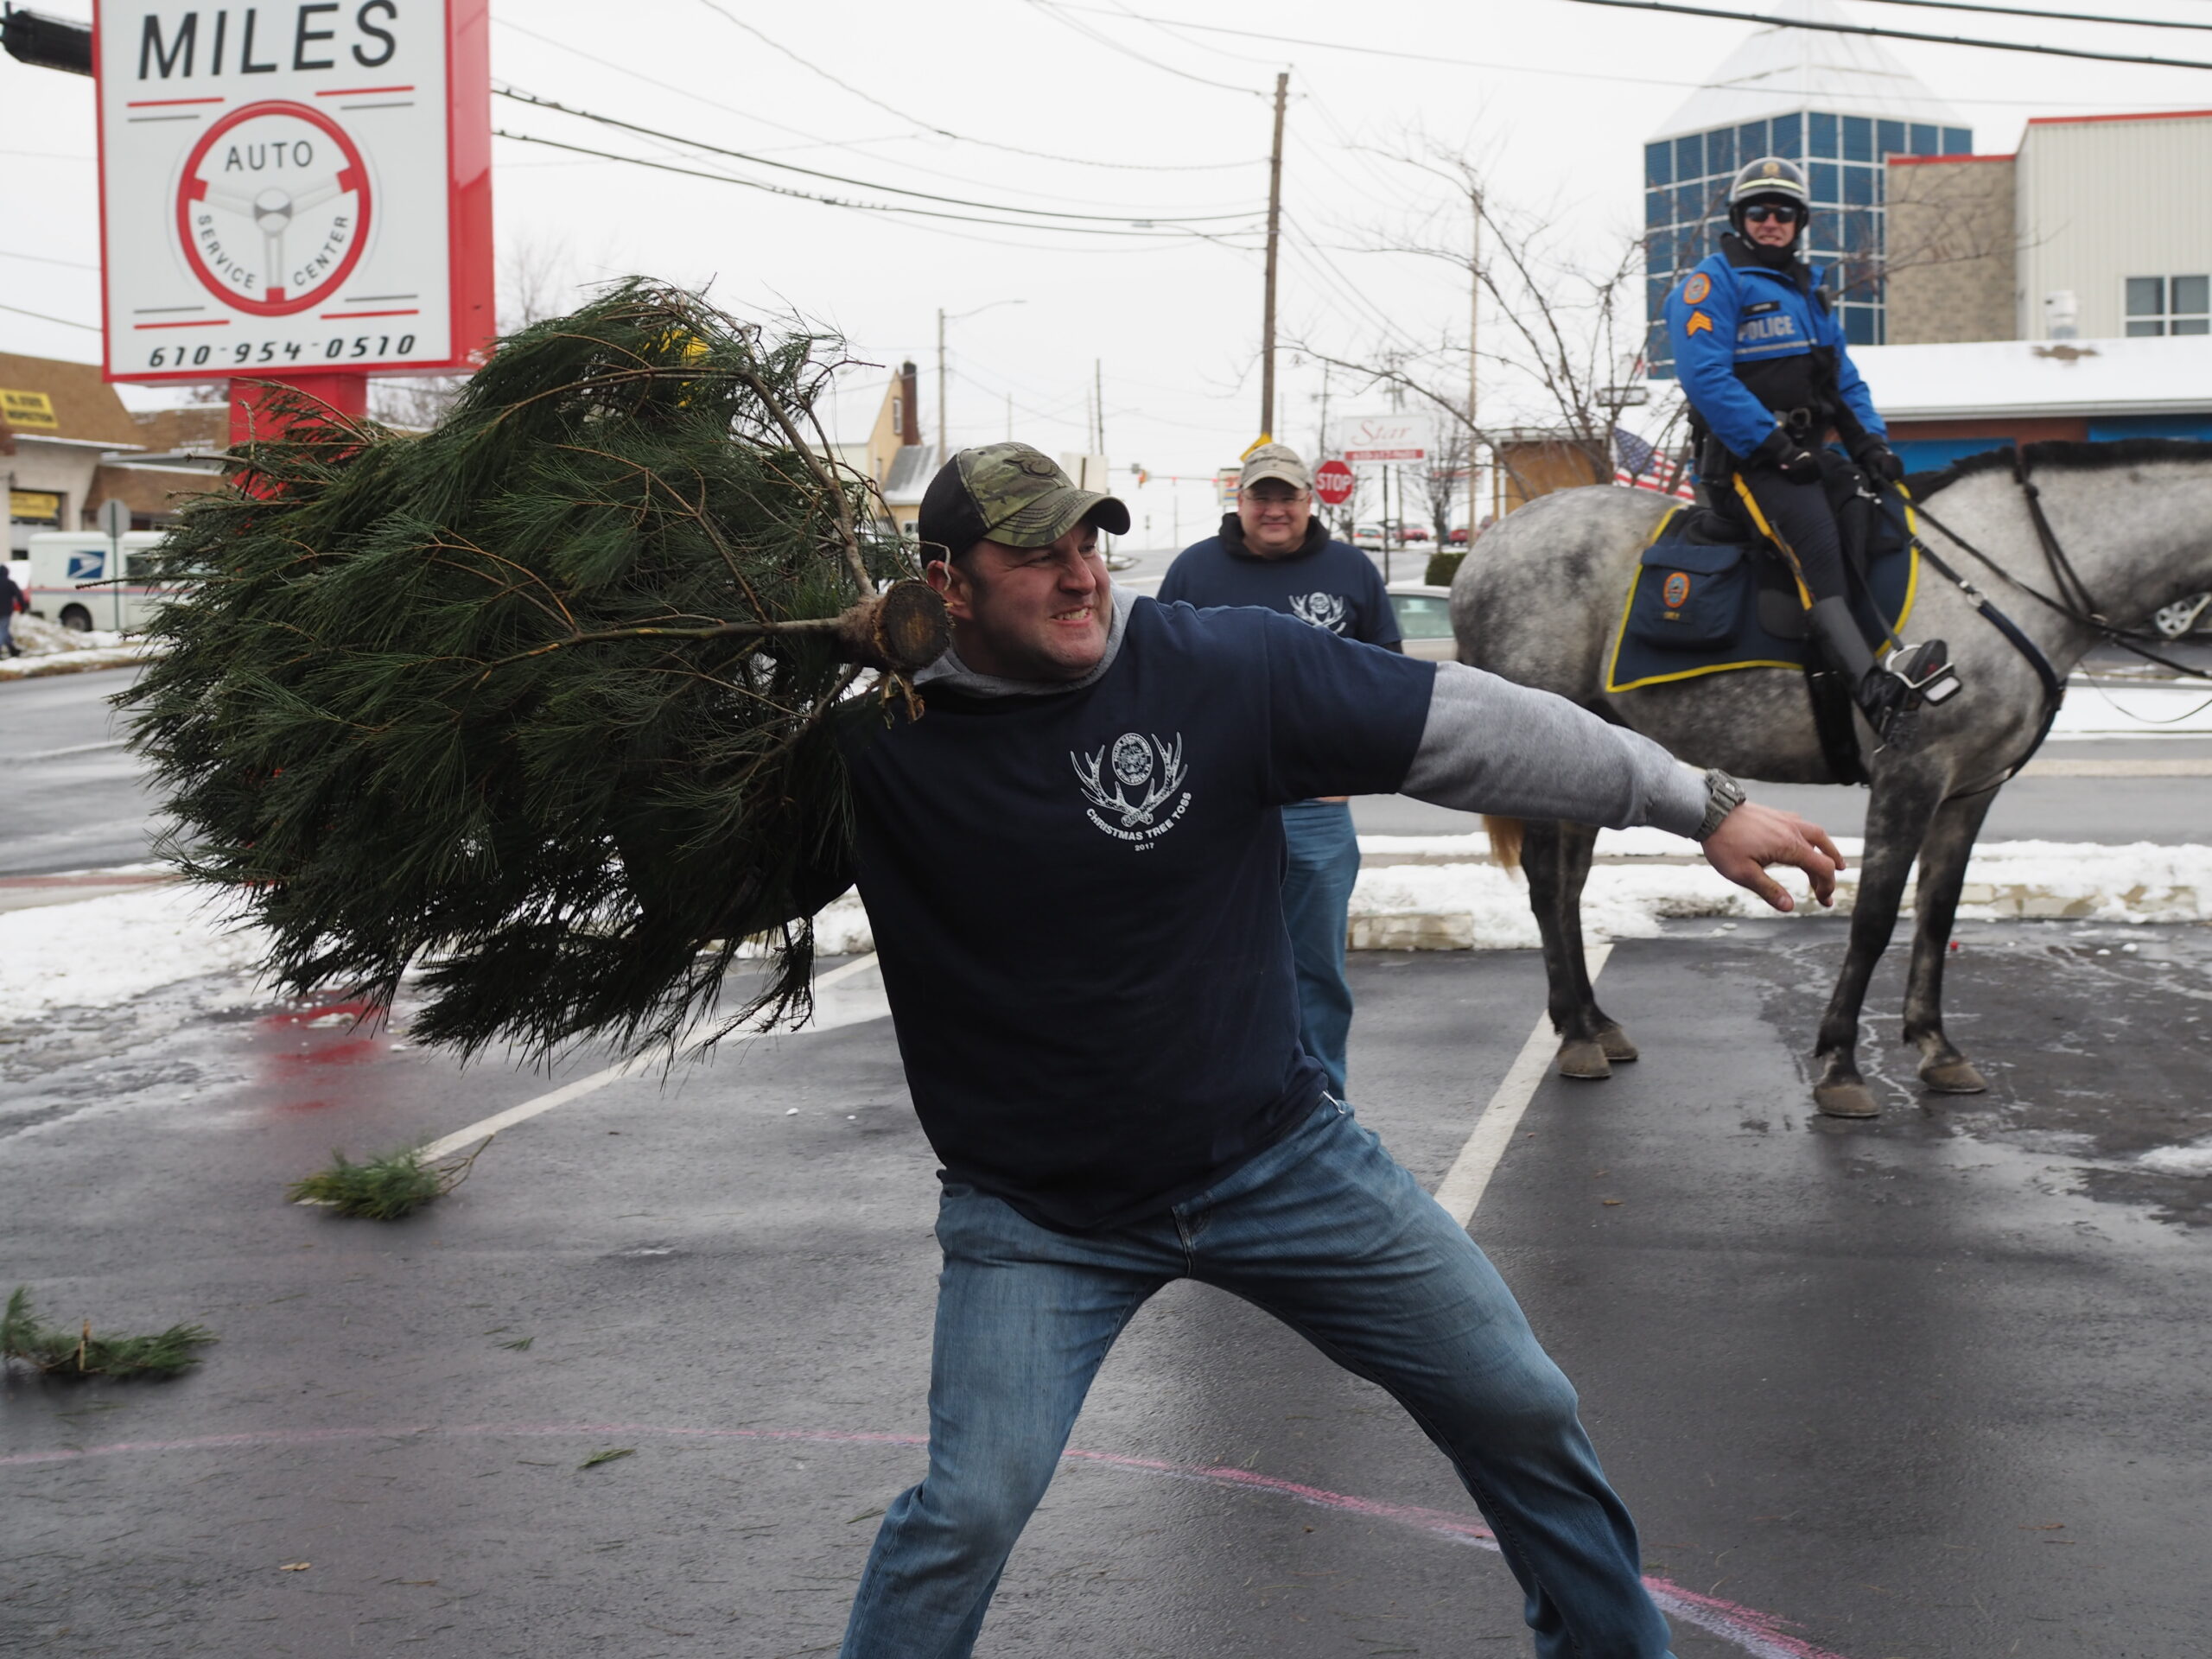 Bethlehem Christmas Tree Toss Featured on National Media Site – Lehigh Valley with Love Media